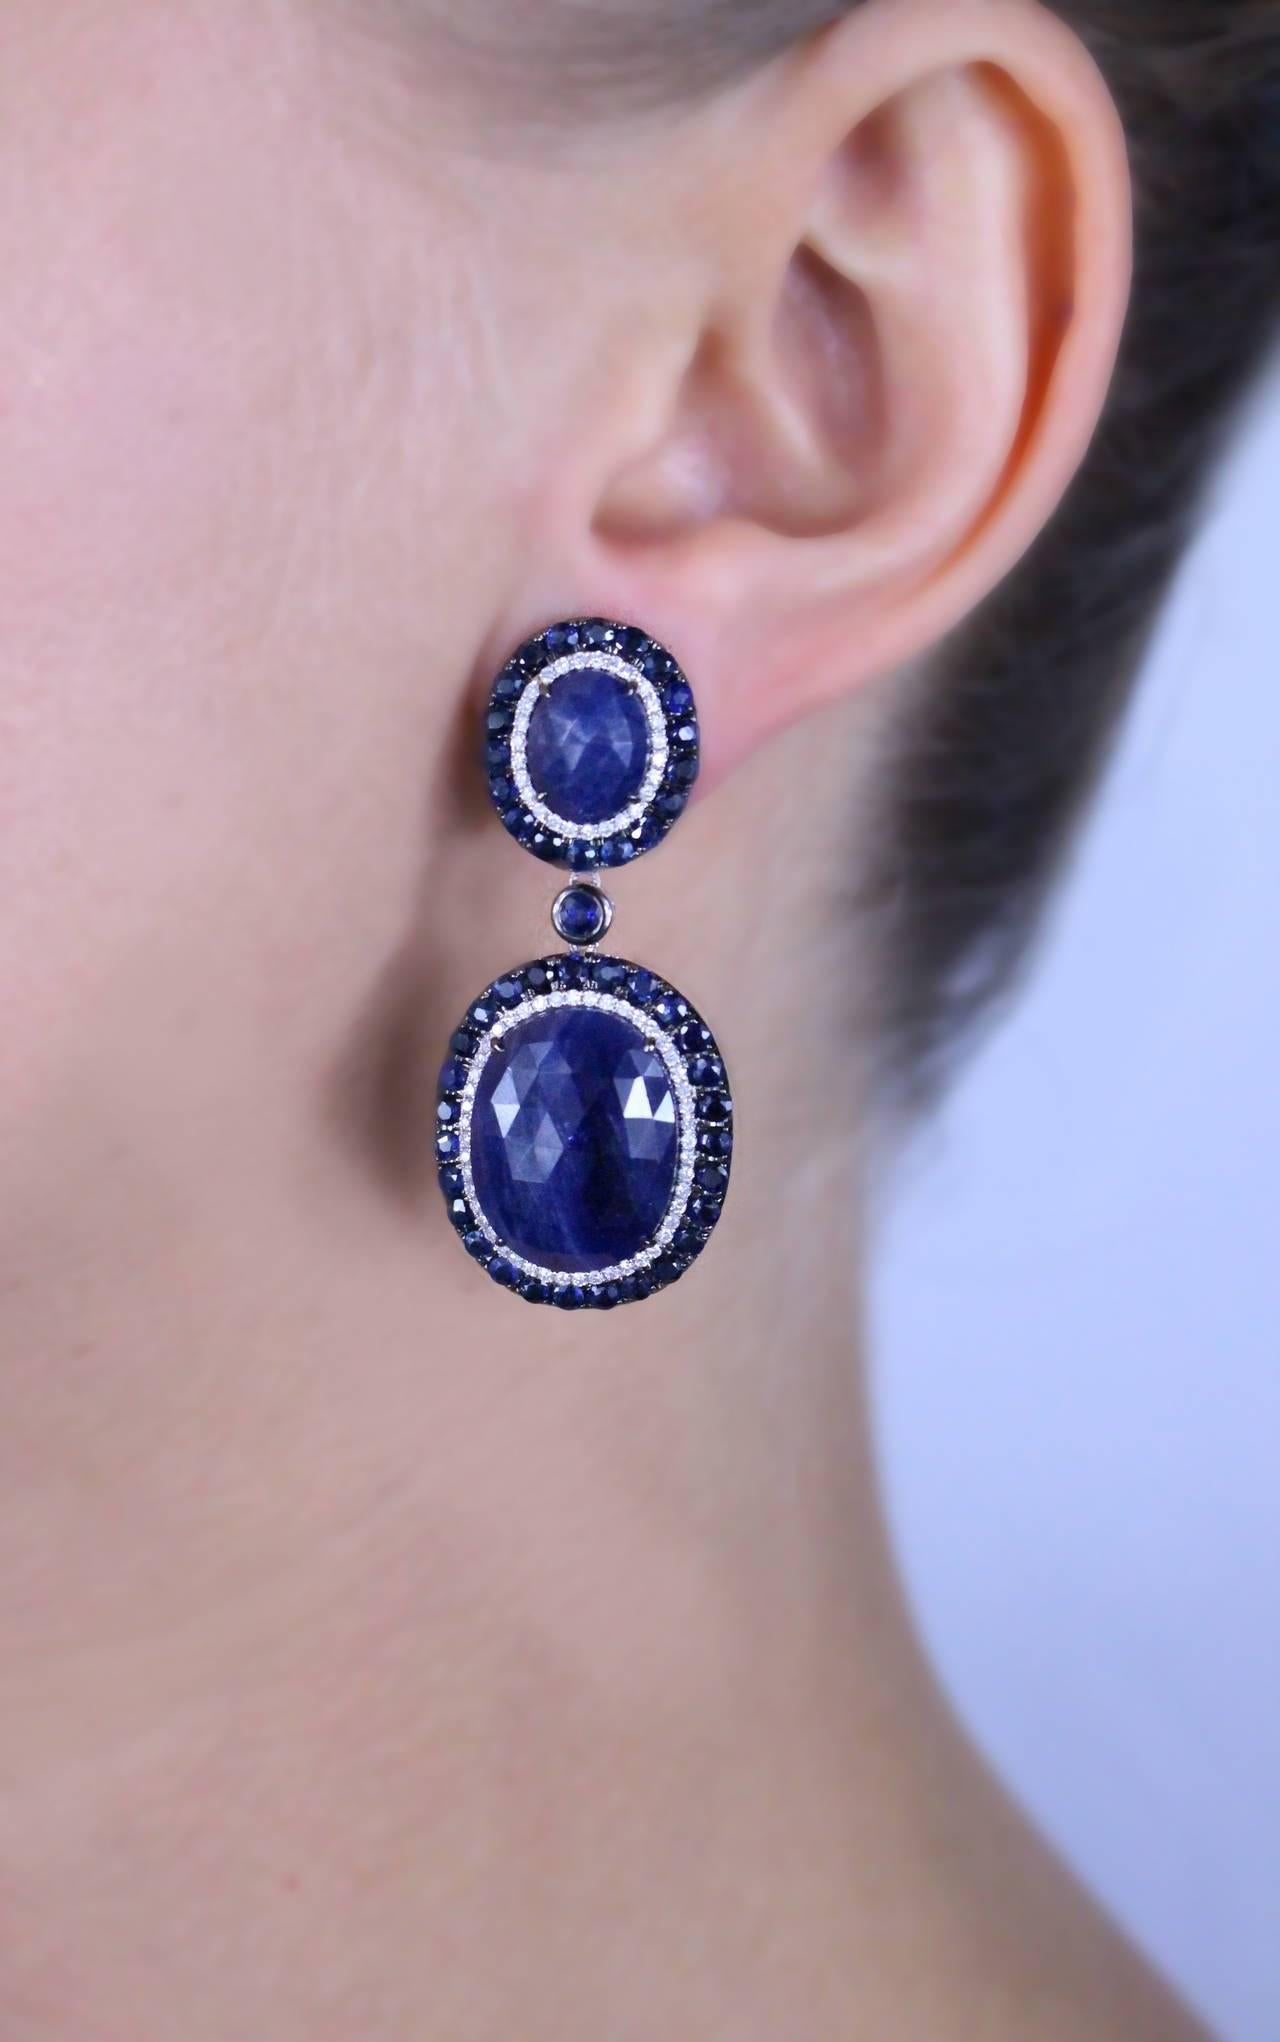 Sapphire and Diamond Earrings featuring 96 mix cut blue sapphires with a total weight of 34.6 carats and 150 single cut diamonds with a total weight of .75 carats.

Metal Type: 18 Kt White Gold 
Metal Weight: 19.8 Grams